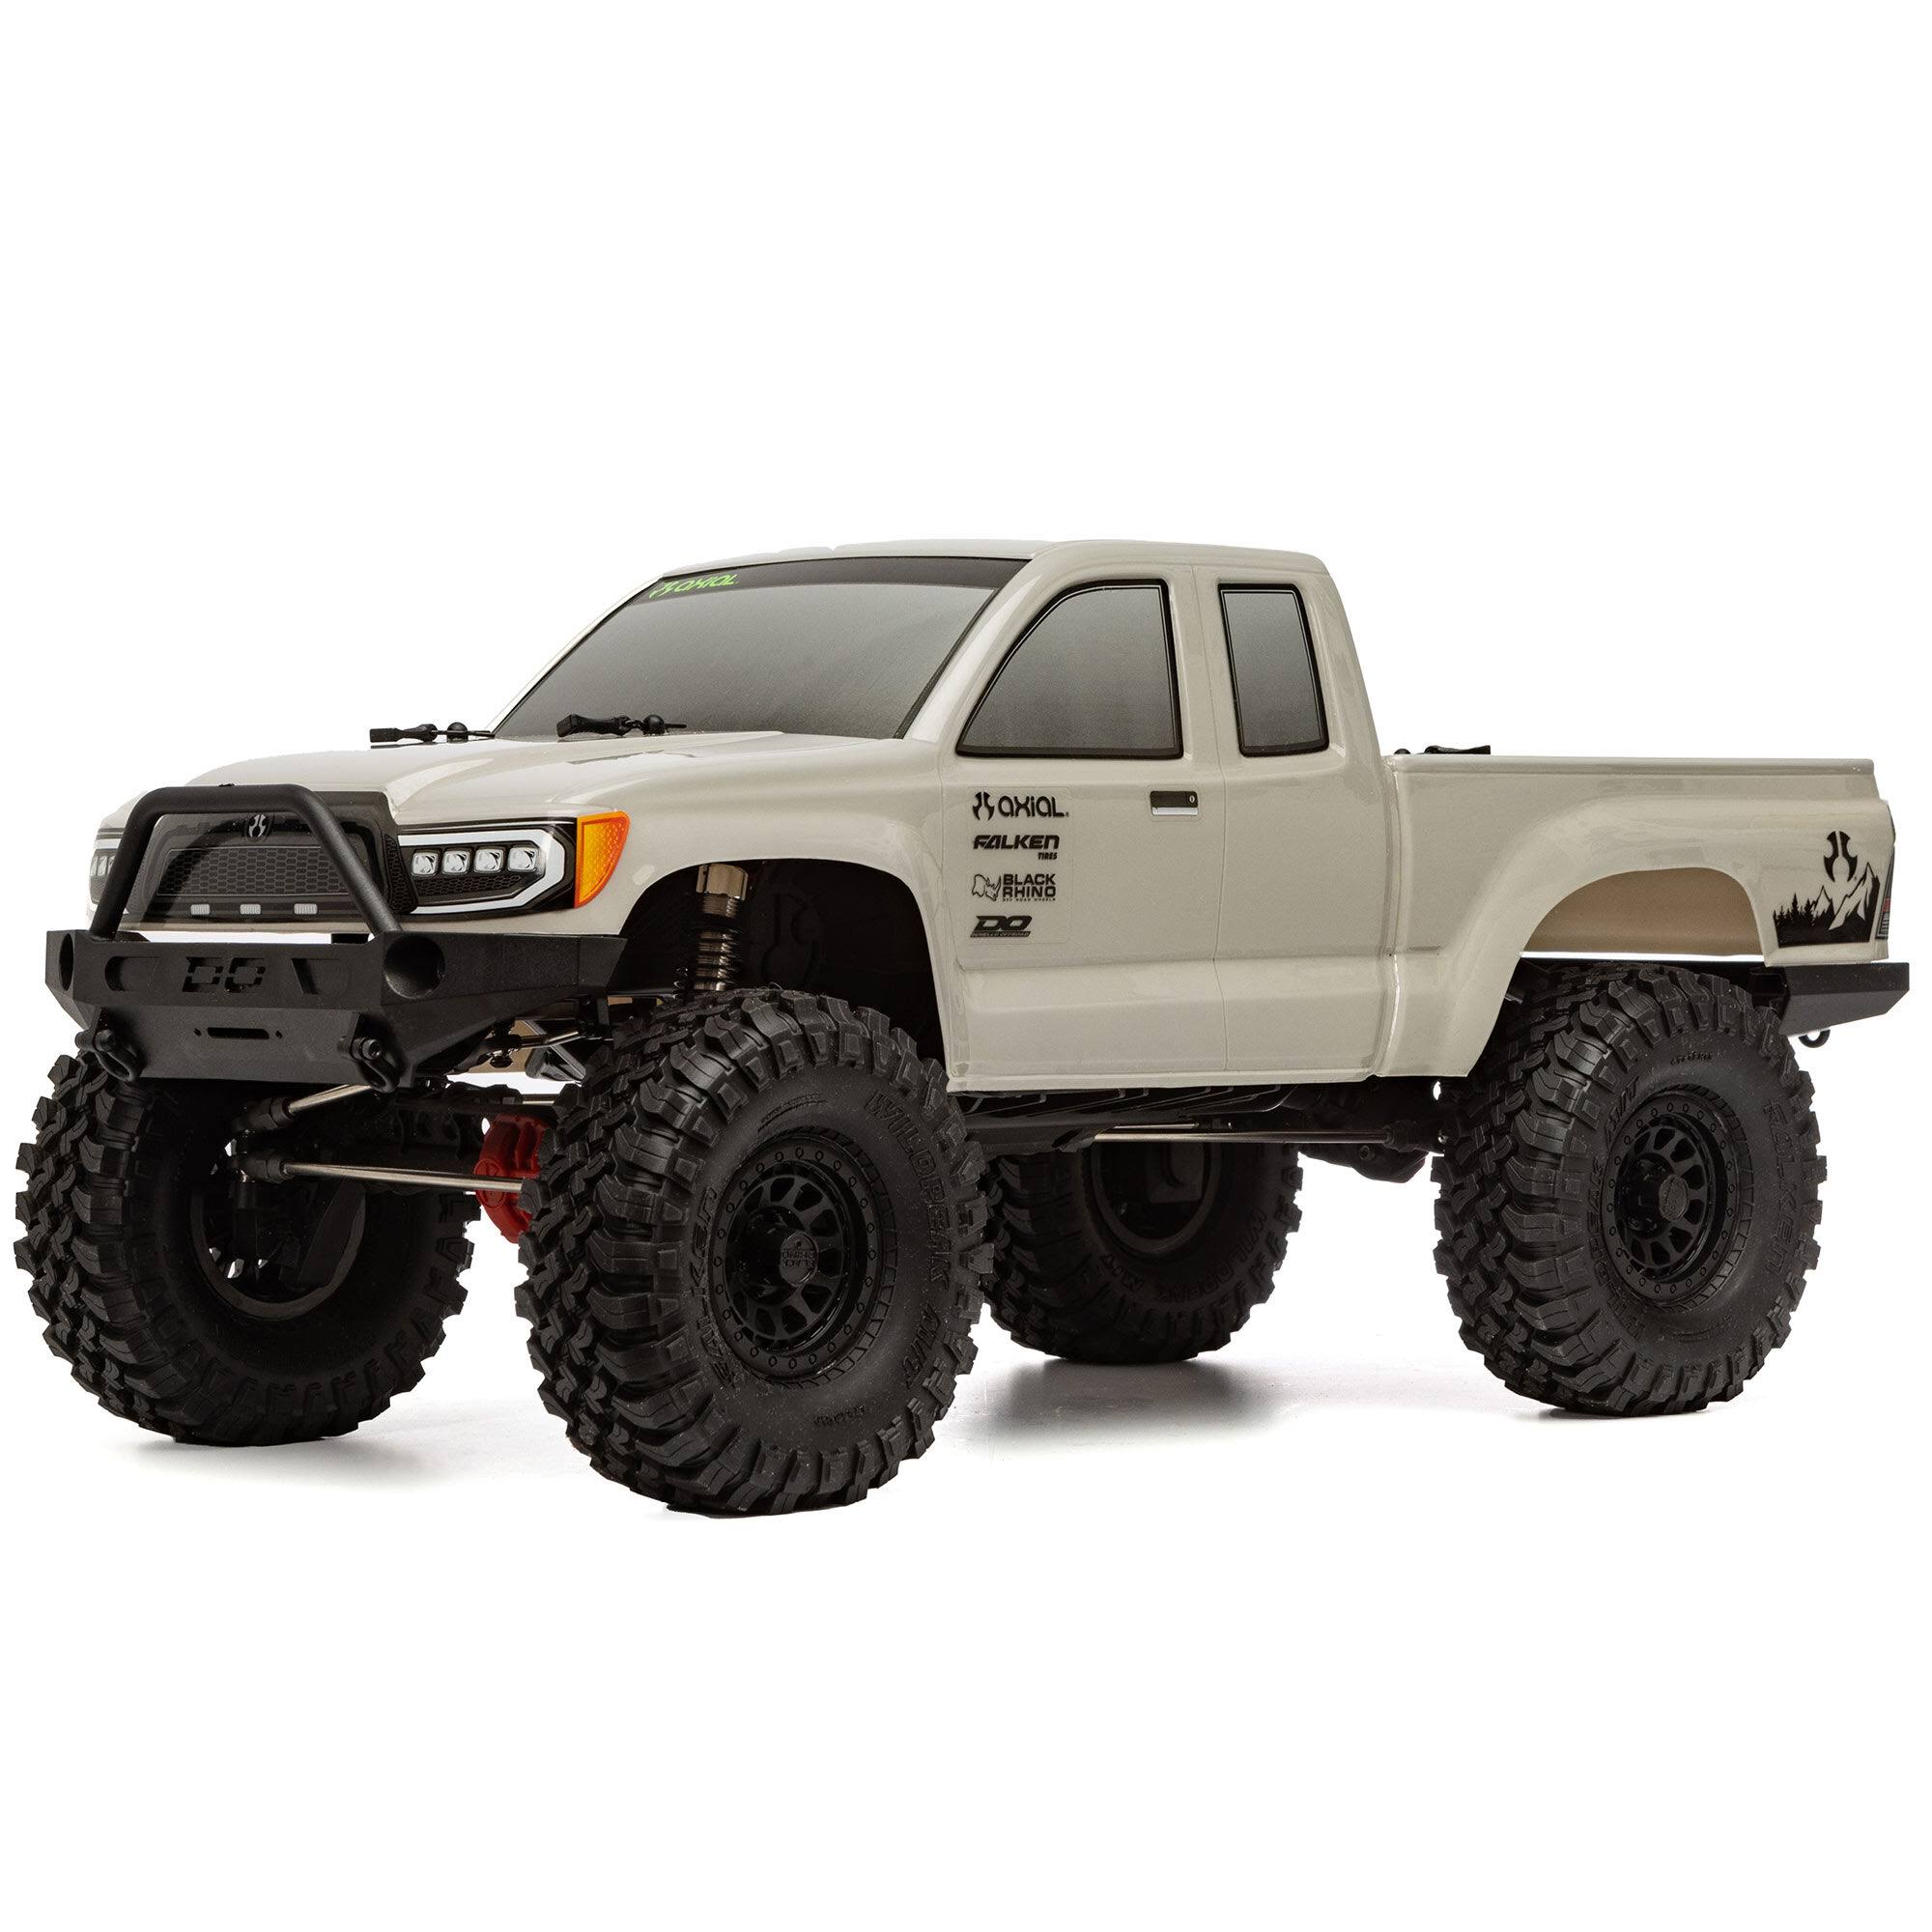 Axial RC Truck 1/10 SCX10 III Base Camp 4WD Rock Crawler Brushed RTR (Batteries and Charger Not Included), Grey, AXI03027T3